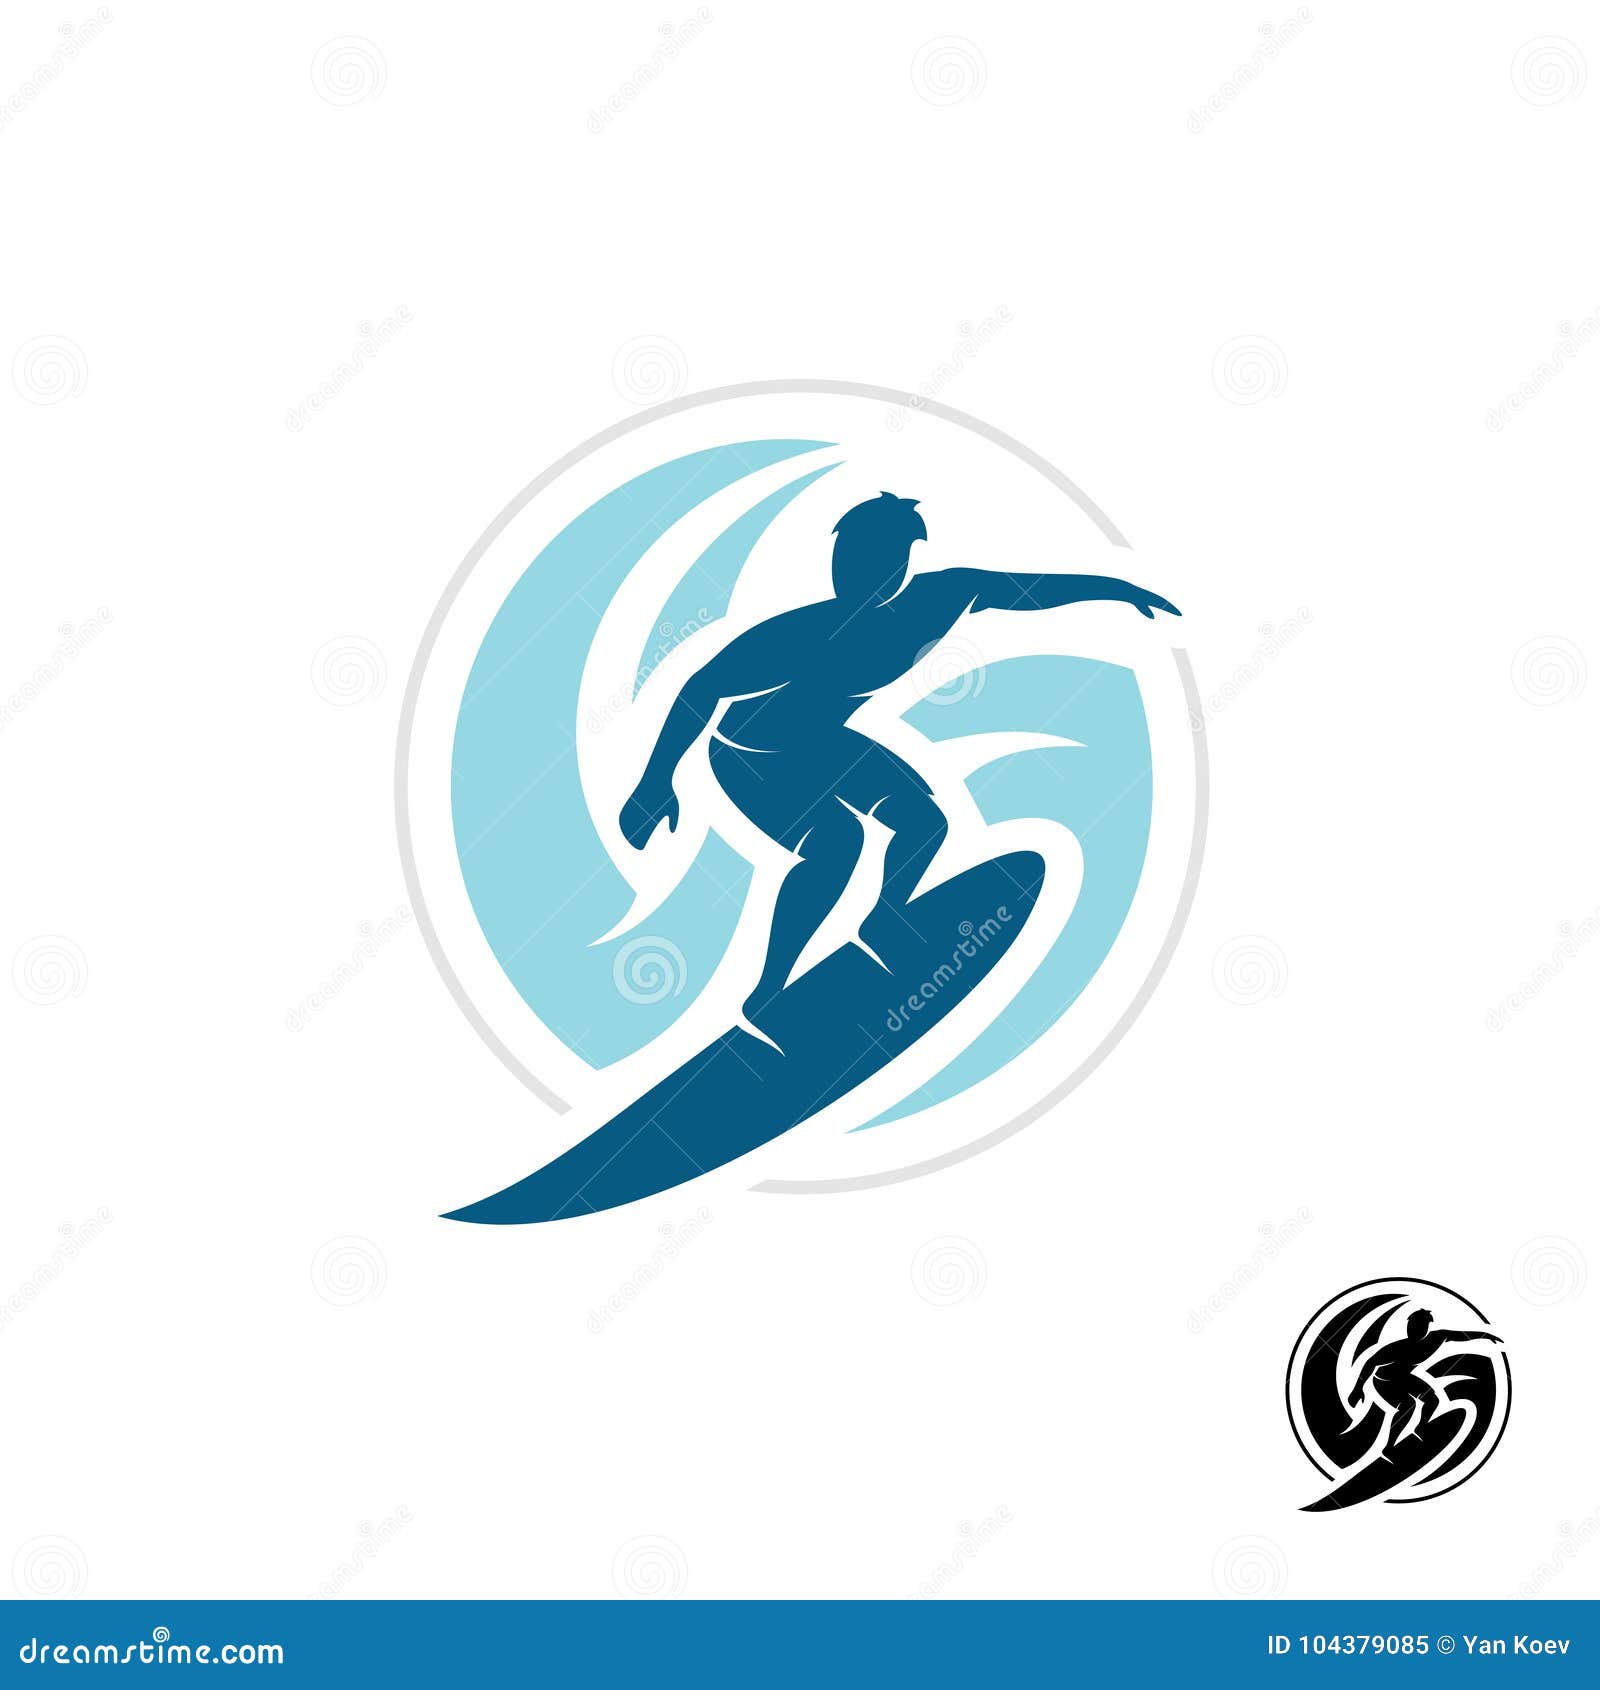 surf logo with man silhouette, board and sea waves.